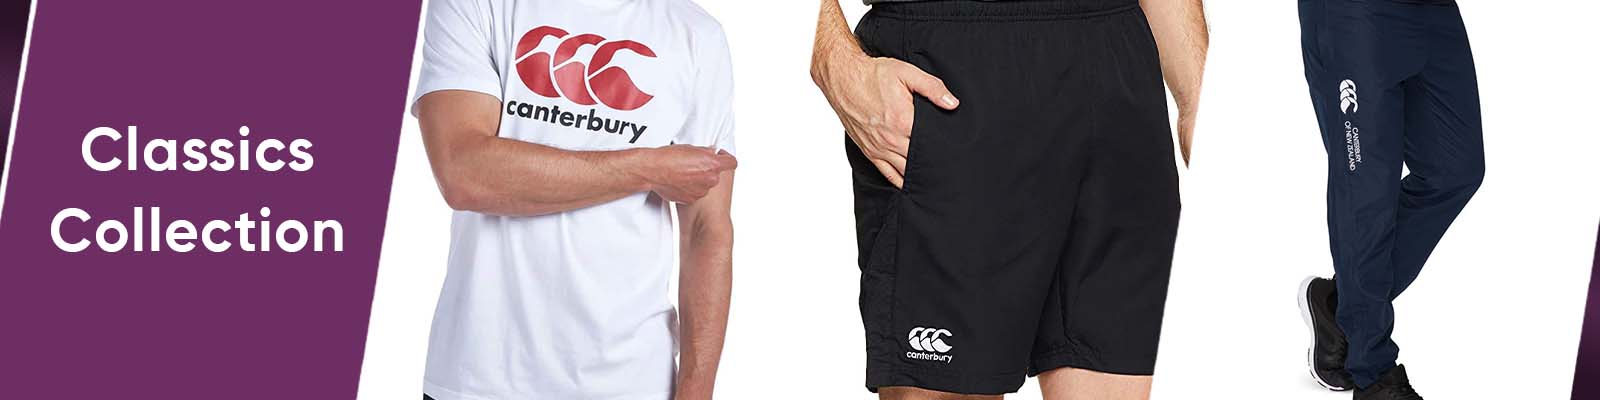 Products from the Canterbury Classics Collection